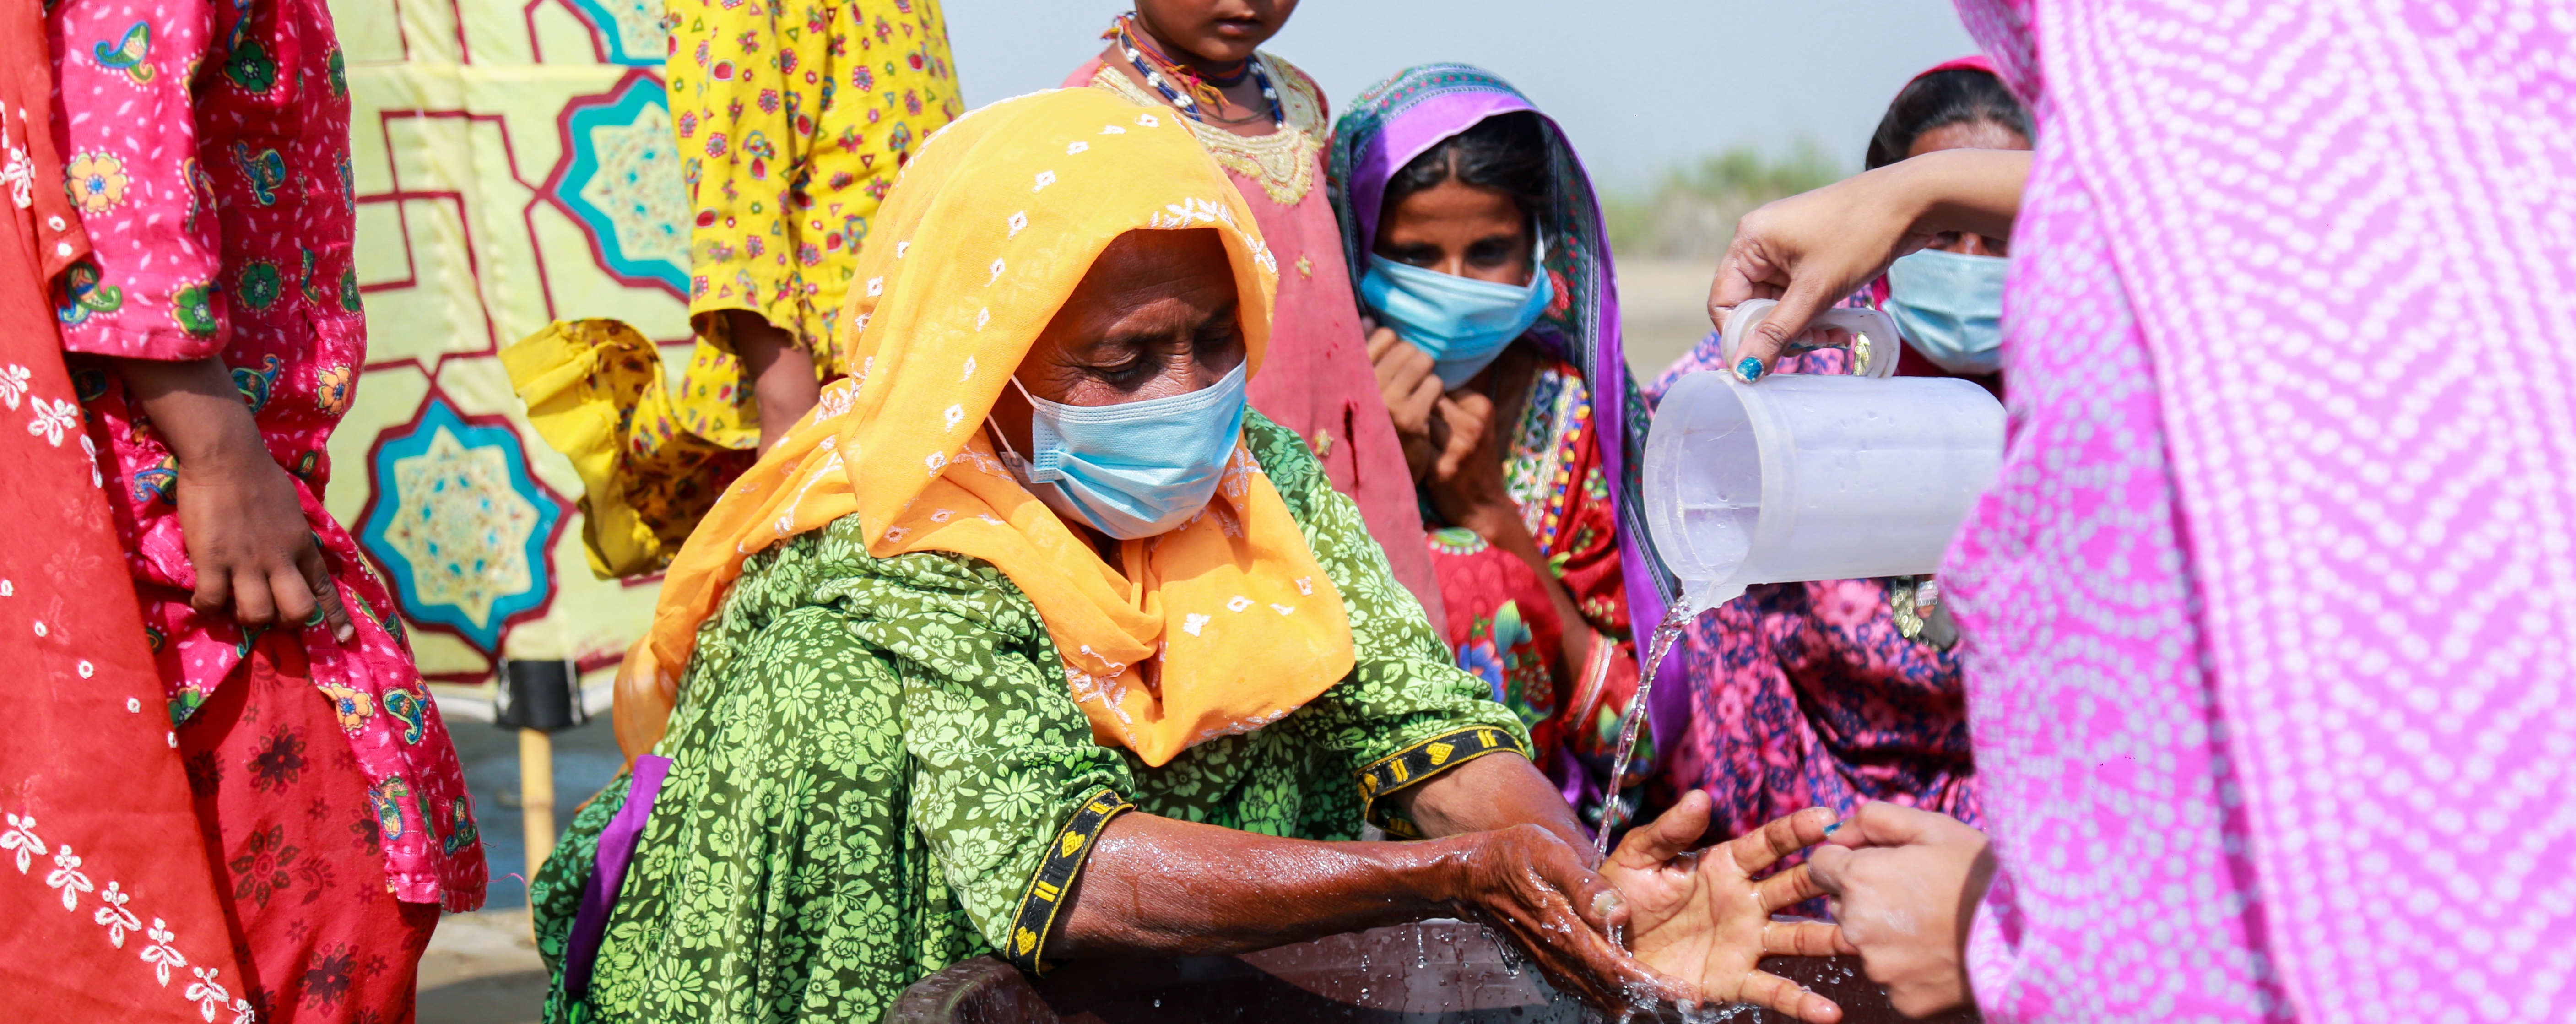 A woman in Pakistan being trained on handwashing techniques. (Photo: Ingenius Captures/Concern Worldwide)